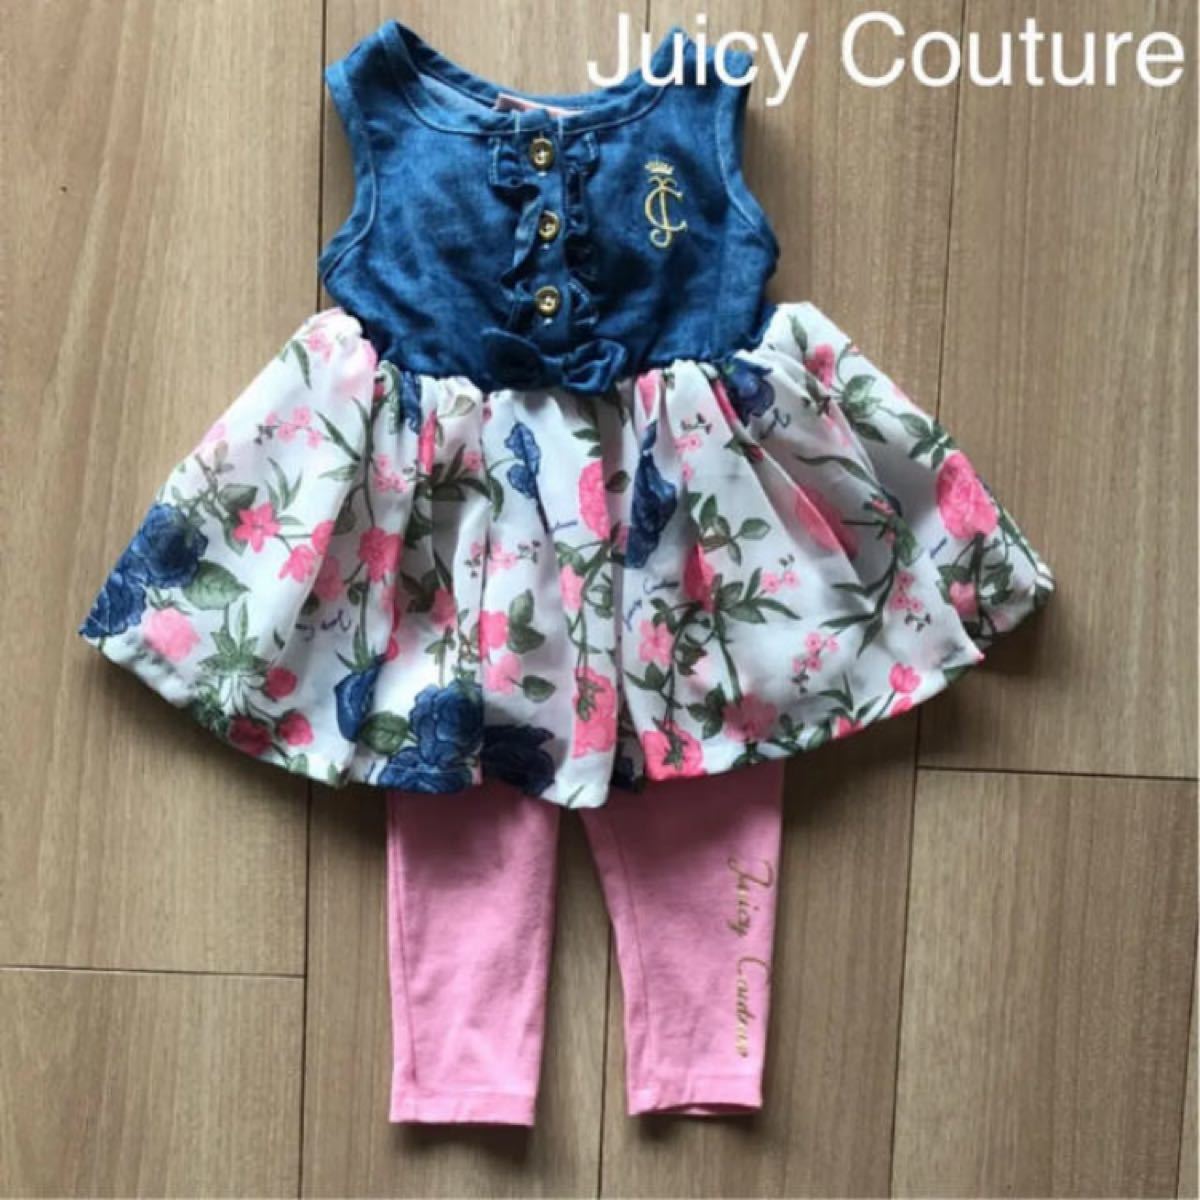 Juicy Couture ワンピース&スパッツセット　12M